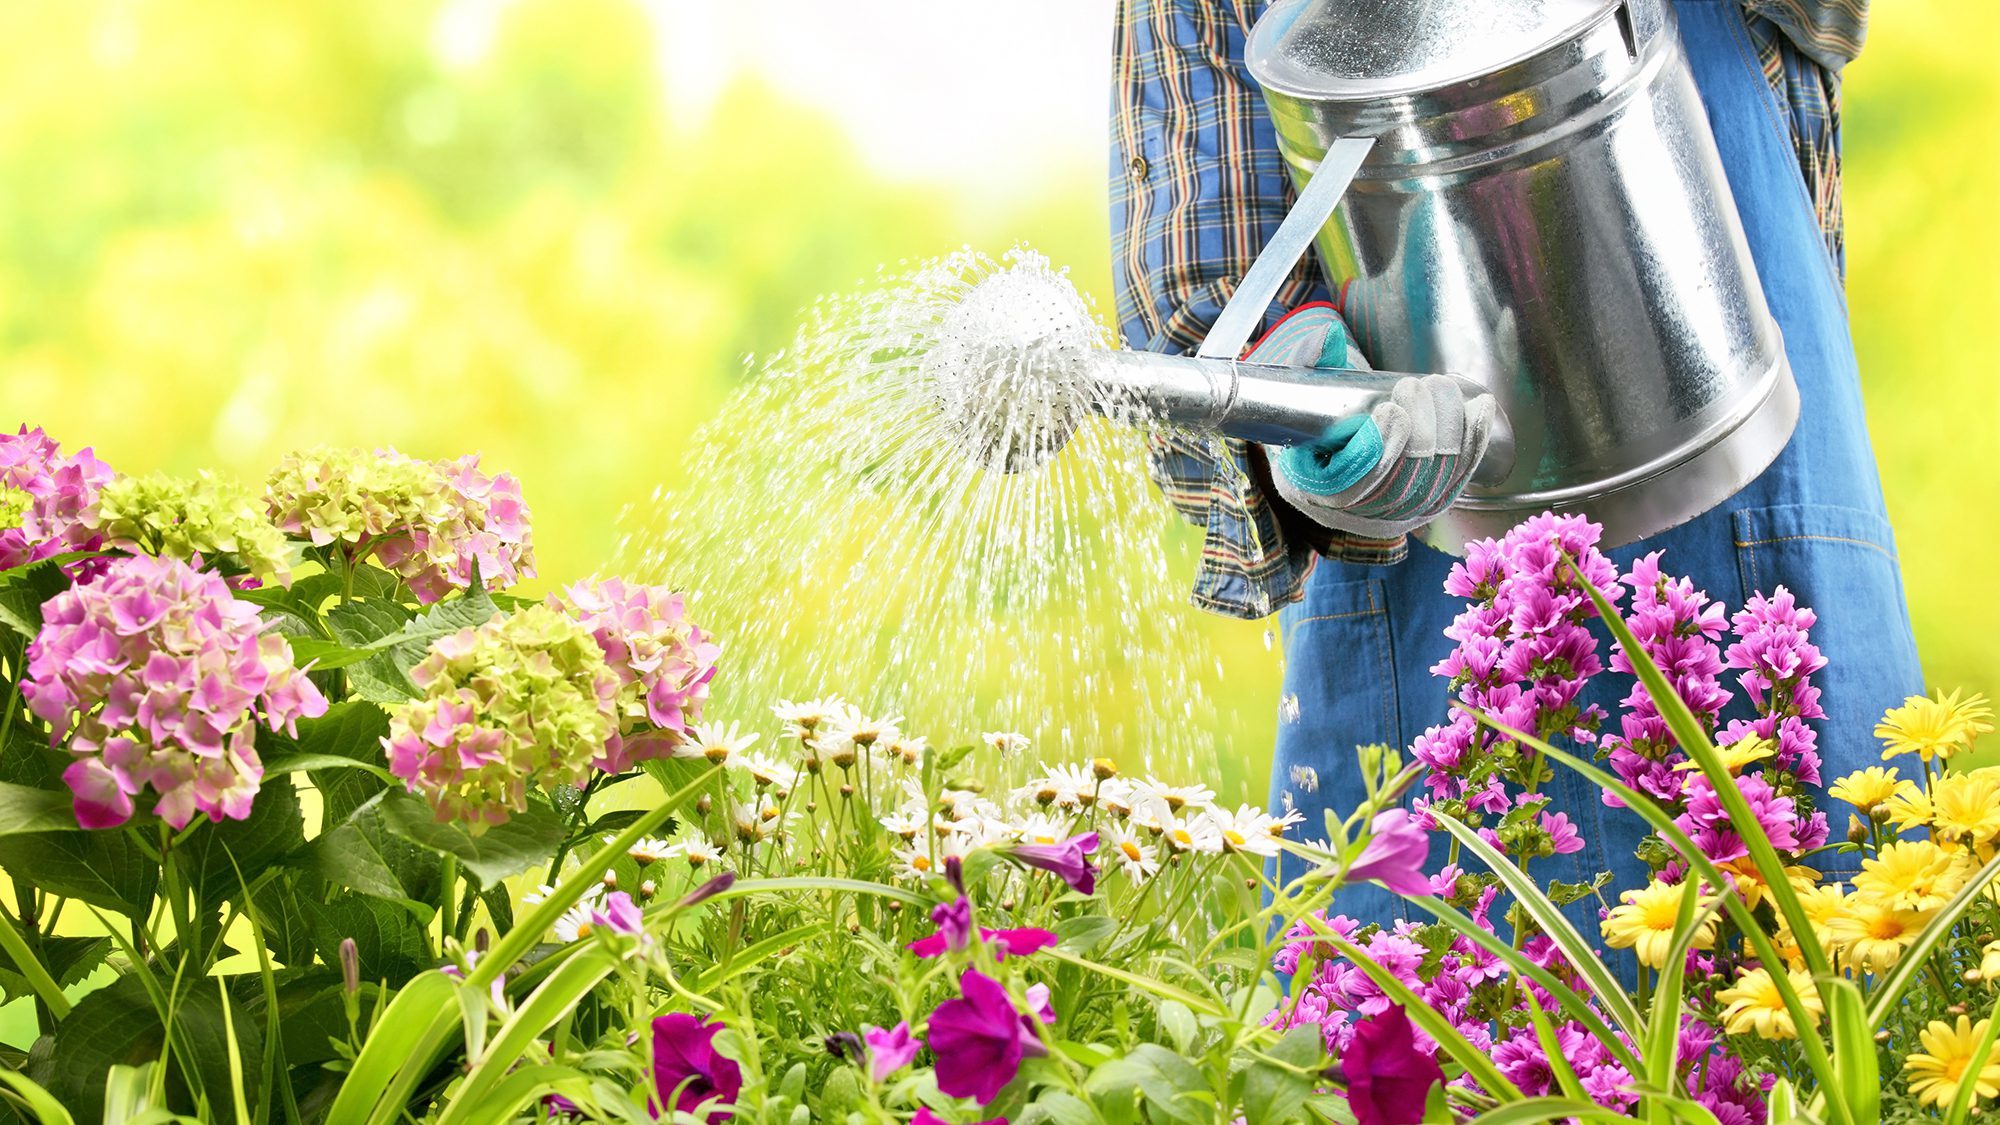 Using a watering can to water flowers